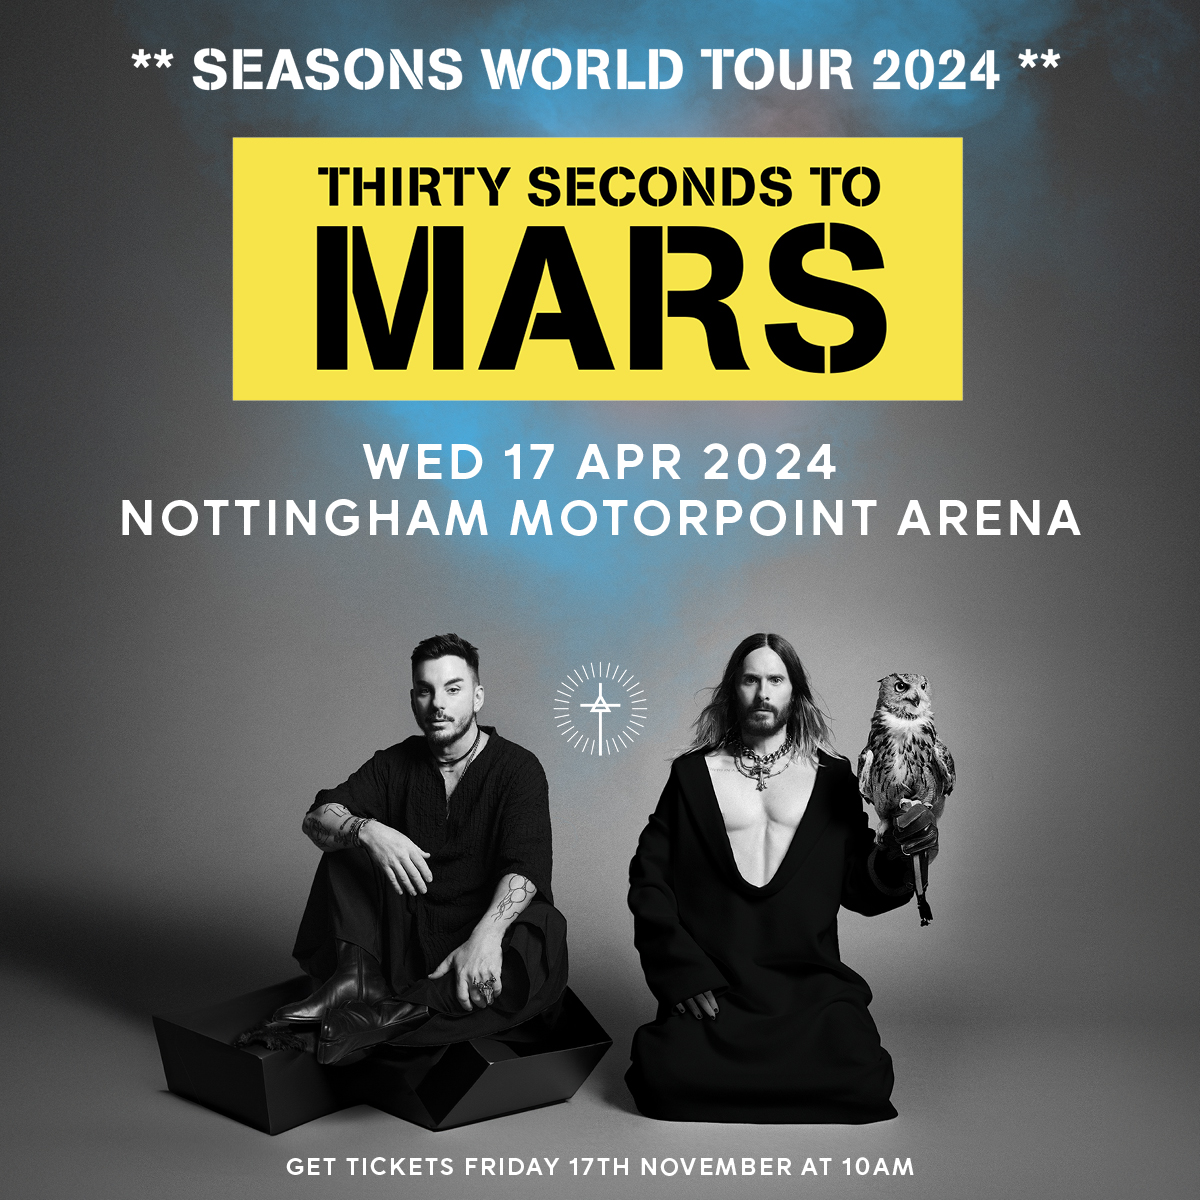 THIRTY SECONDS TO MARS are returning to Nottingham! 🎸 📆 Wednesday 17 April 2024 🎫 Tickets on sale Friday 17 November at 10am (mailing list subscribers can access our pre sale Thursday 16 November at 10am!) 📲 Sign up to our mailing list now - bit.ly/2xDhJo3